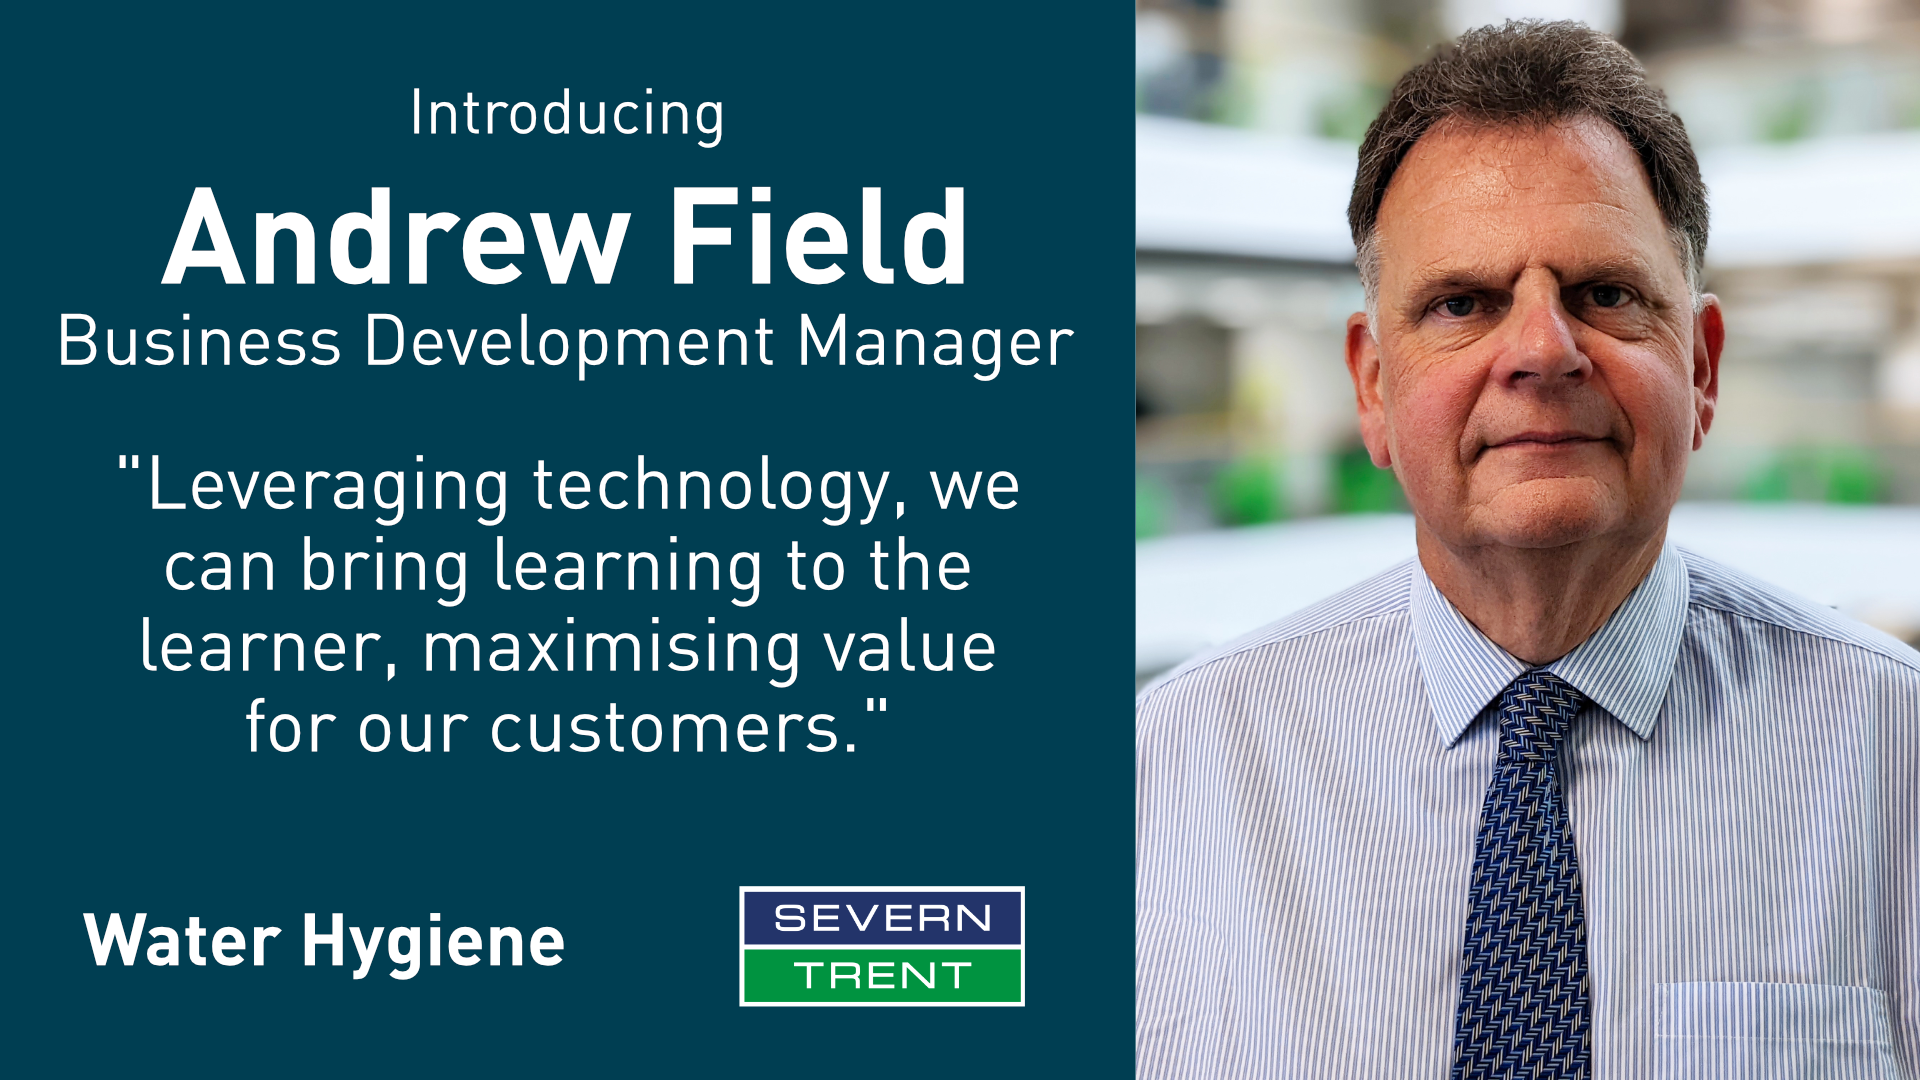 Meet Andrew Field, our new Business Development Manager